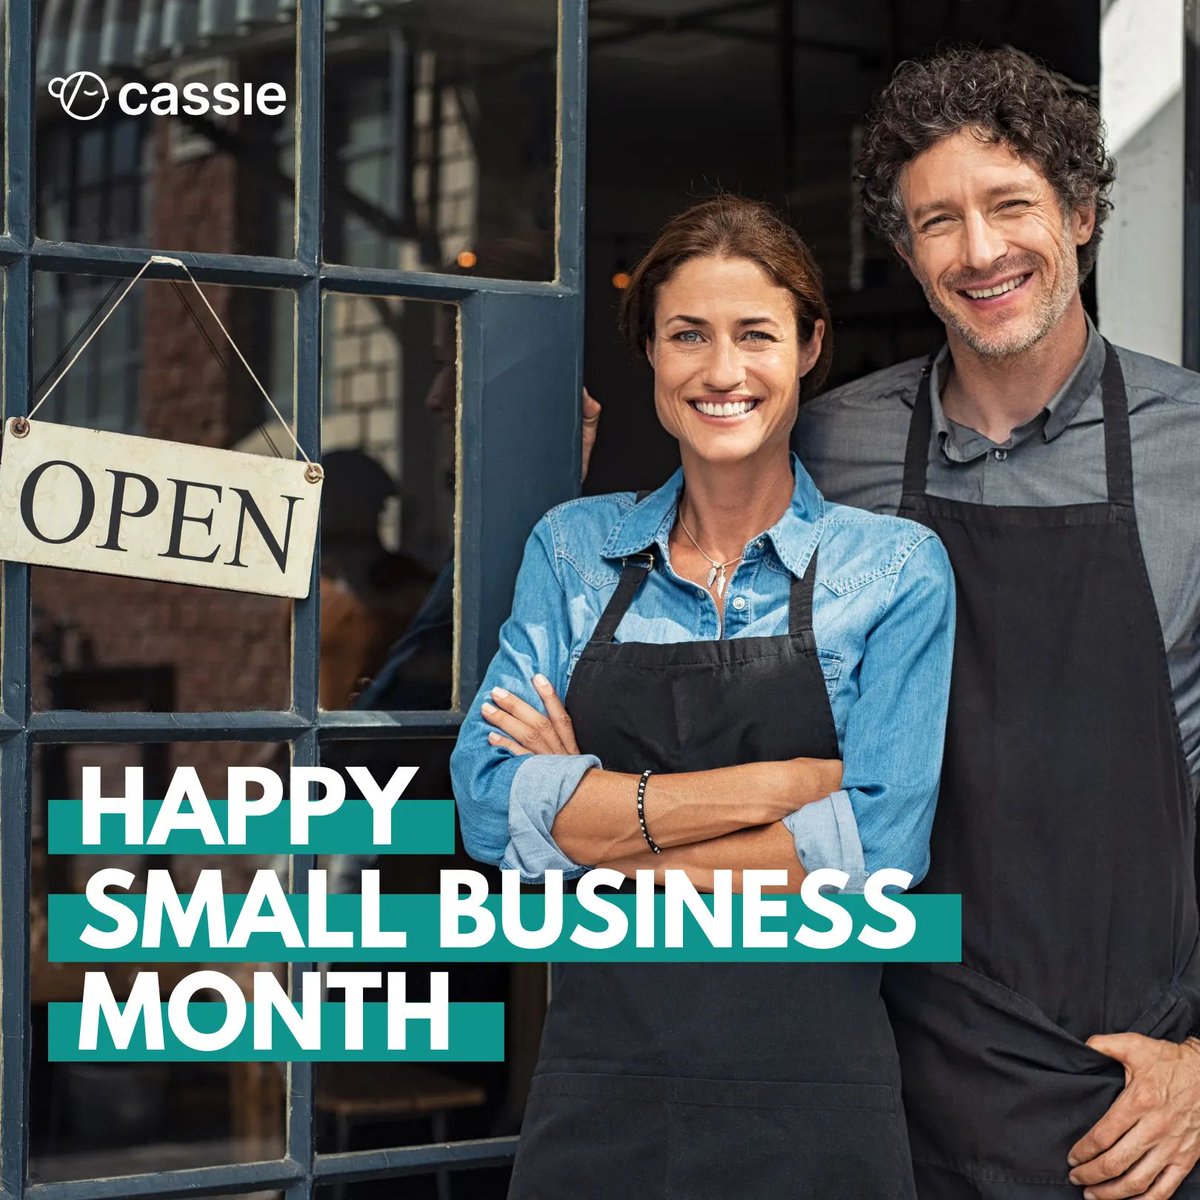 May is Small Business Month! Let's celebrate the power of small businesses. They're the heartbeat of our communities and the backbone of our economy. Let's support and celebrate our local small businesses not just this month, but every day.

#SmallBusinessMonth #Cassie